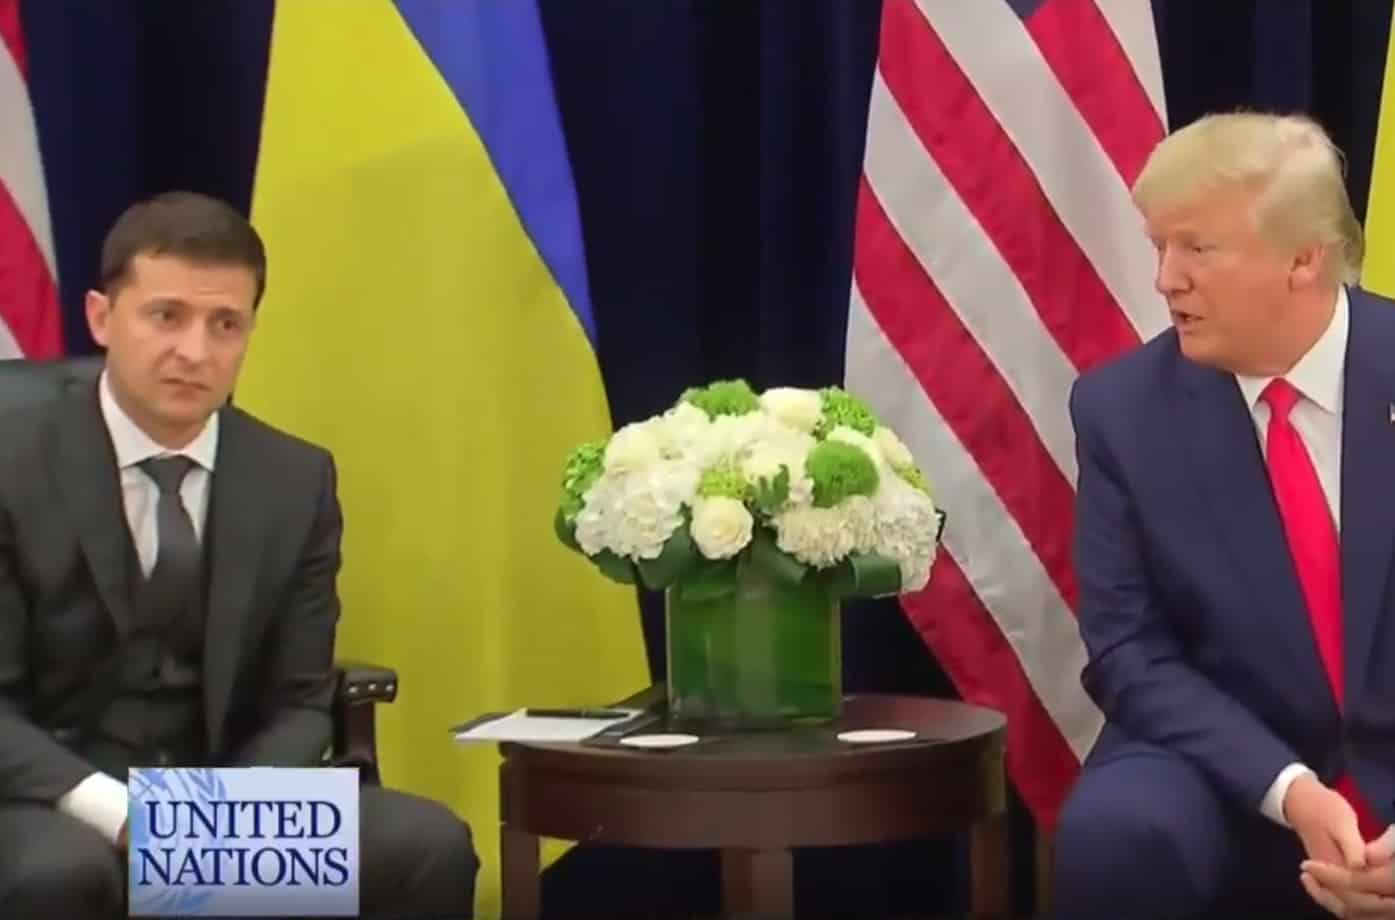 Clip resurfaces of Trump telling Zelensky: ‘I really hope you and Putin can solve your problem’